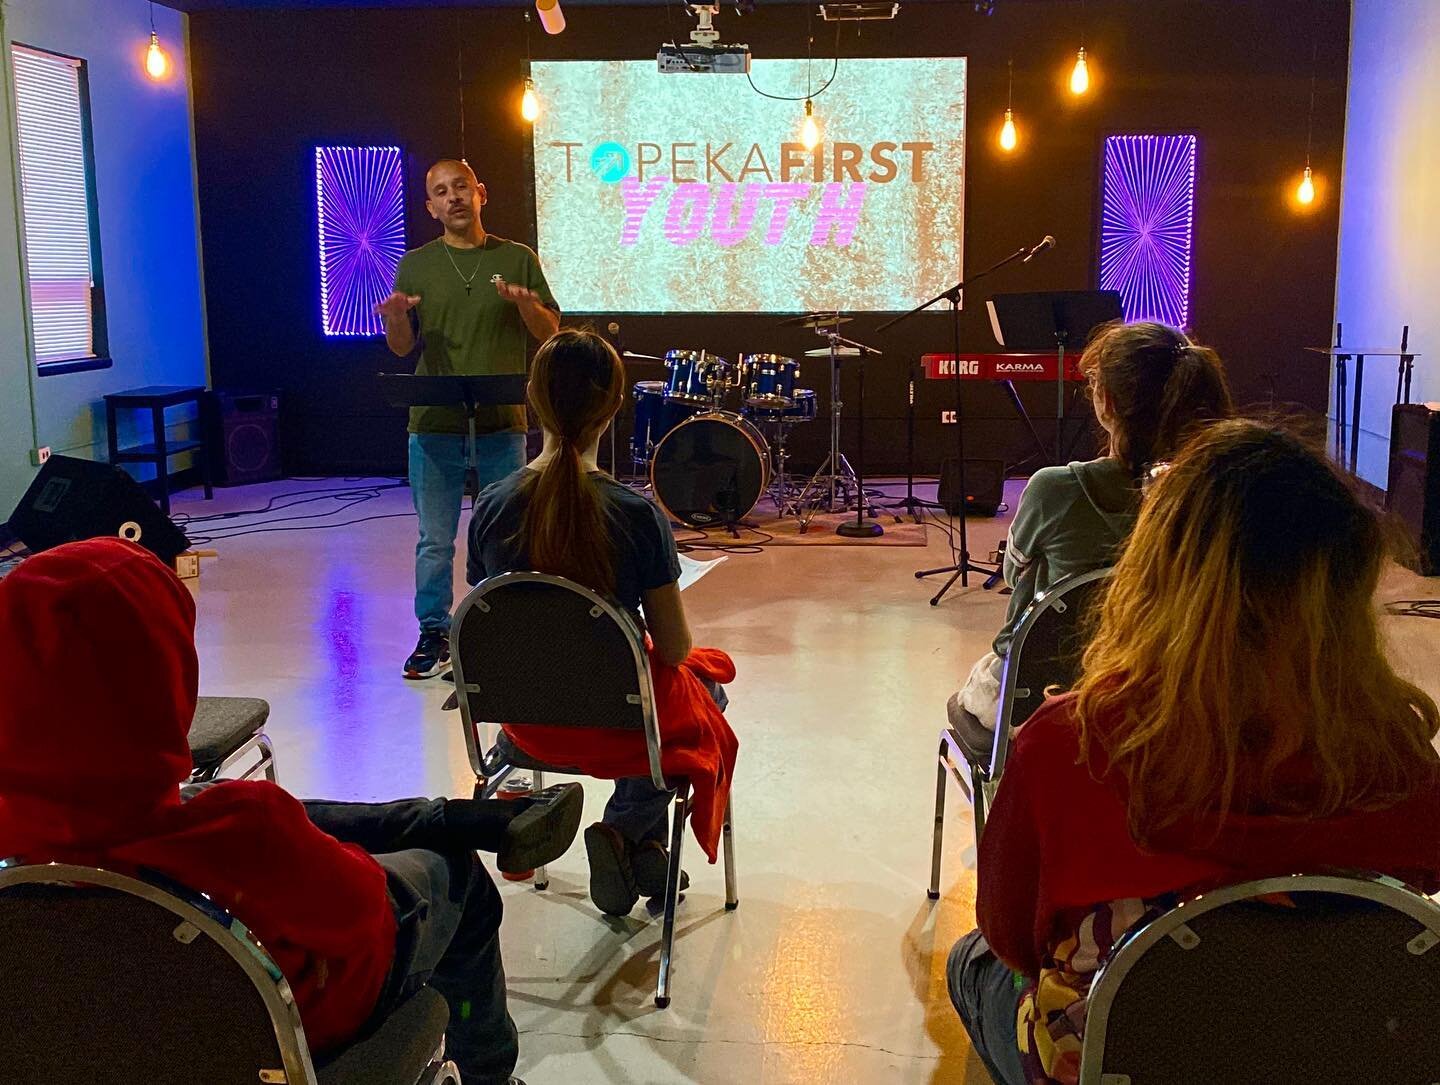 Thanks for bringing the word of God alive to our youth students Aaron! The message of Jeremiah 29:13 is an important truth to us all.